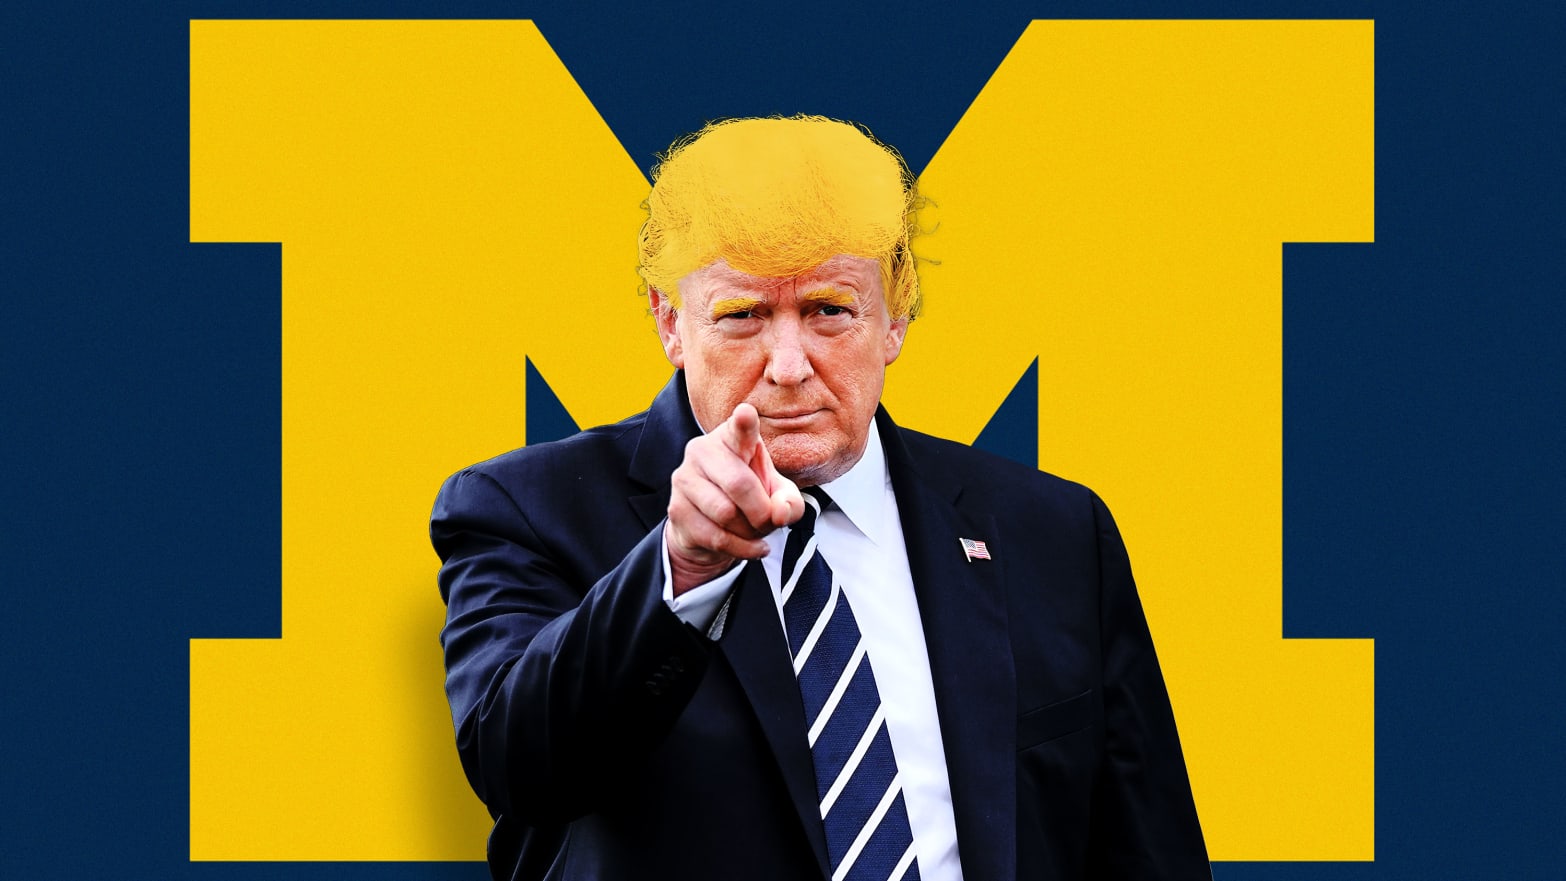 An illustration including a photo of former U.S. President Donald Trump and the Michigan sports logo